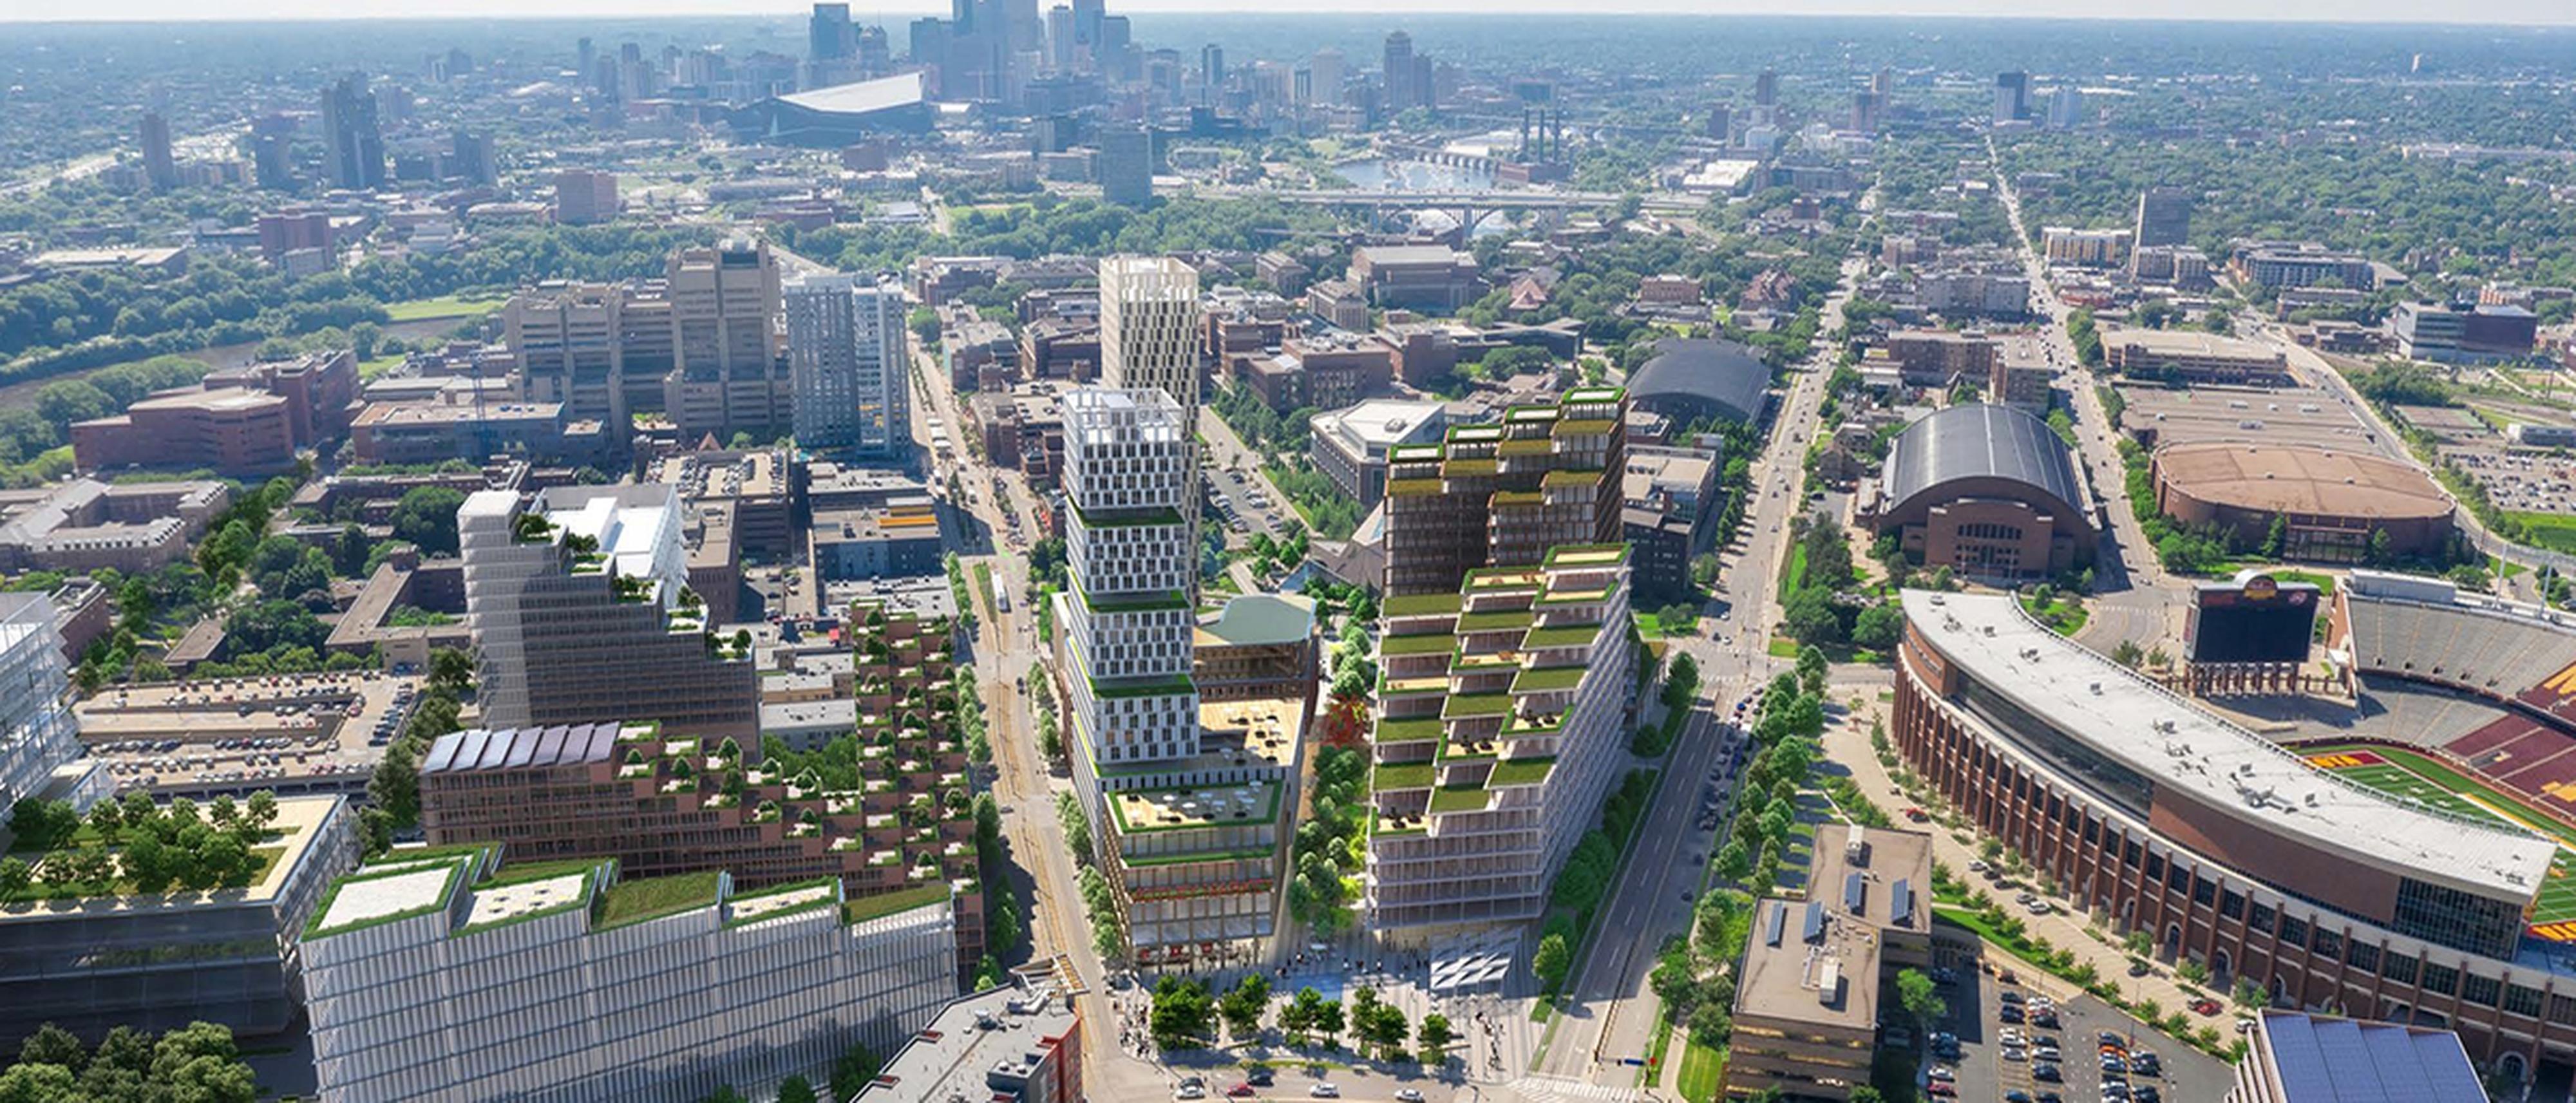 The Minnesota Innovation Exchange conceptual rendering